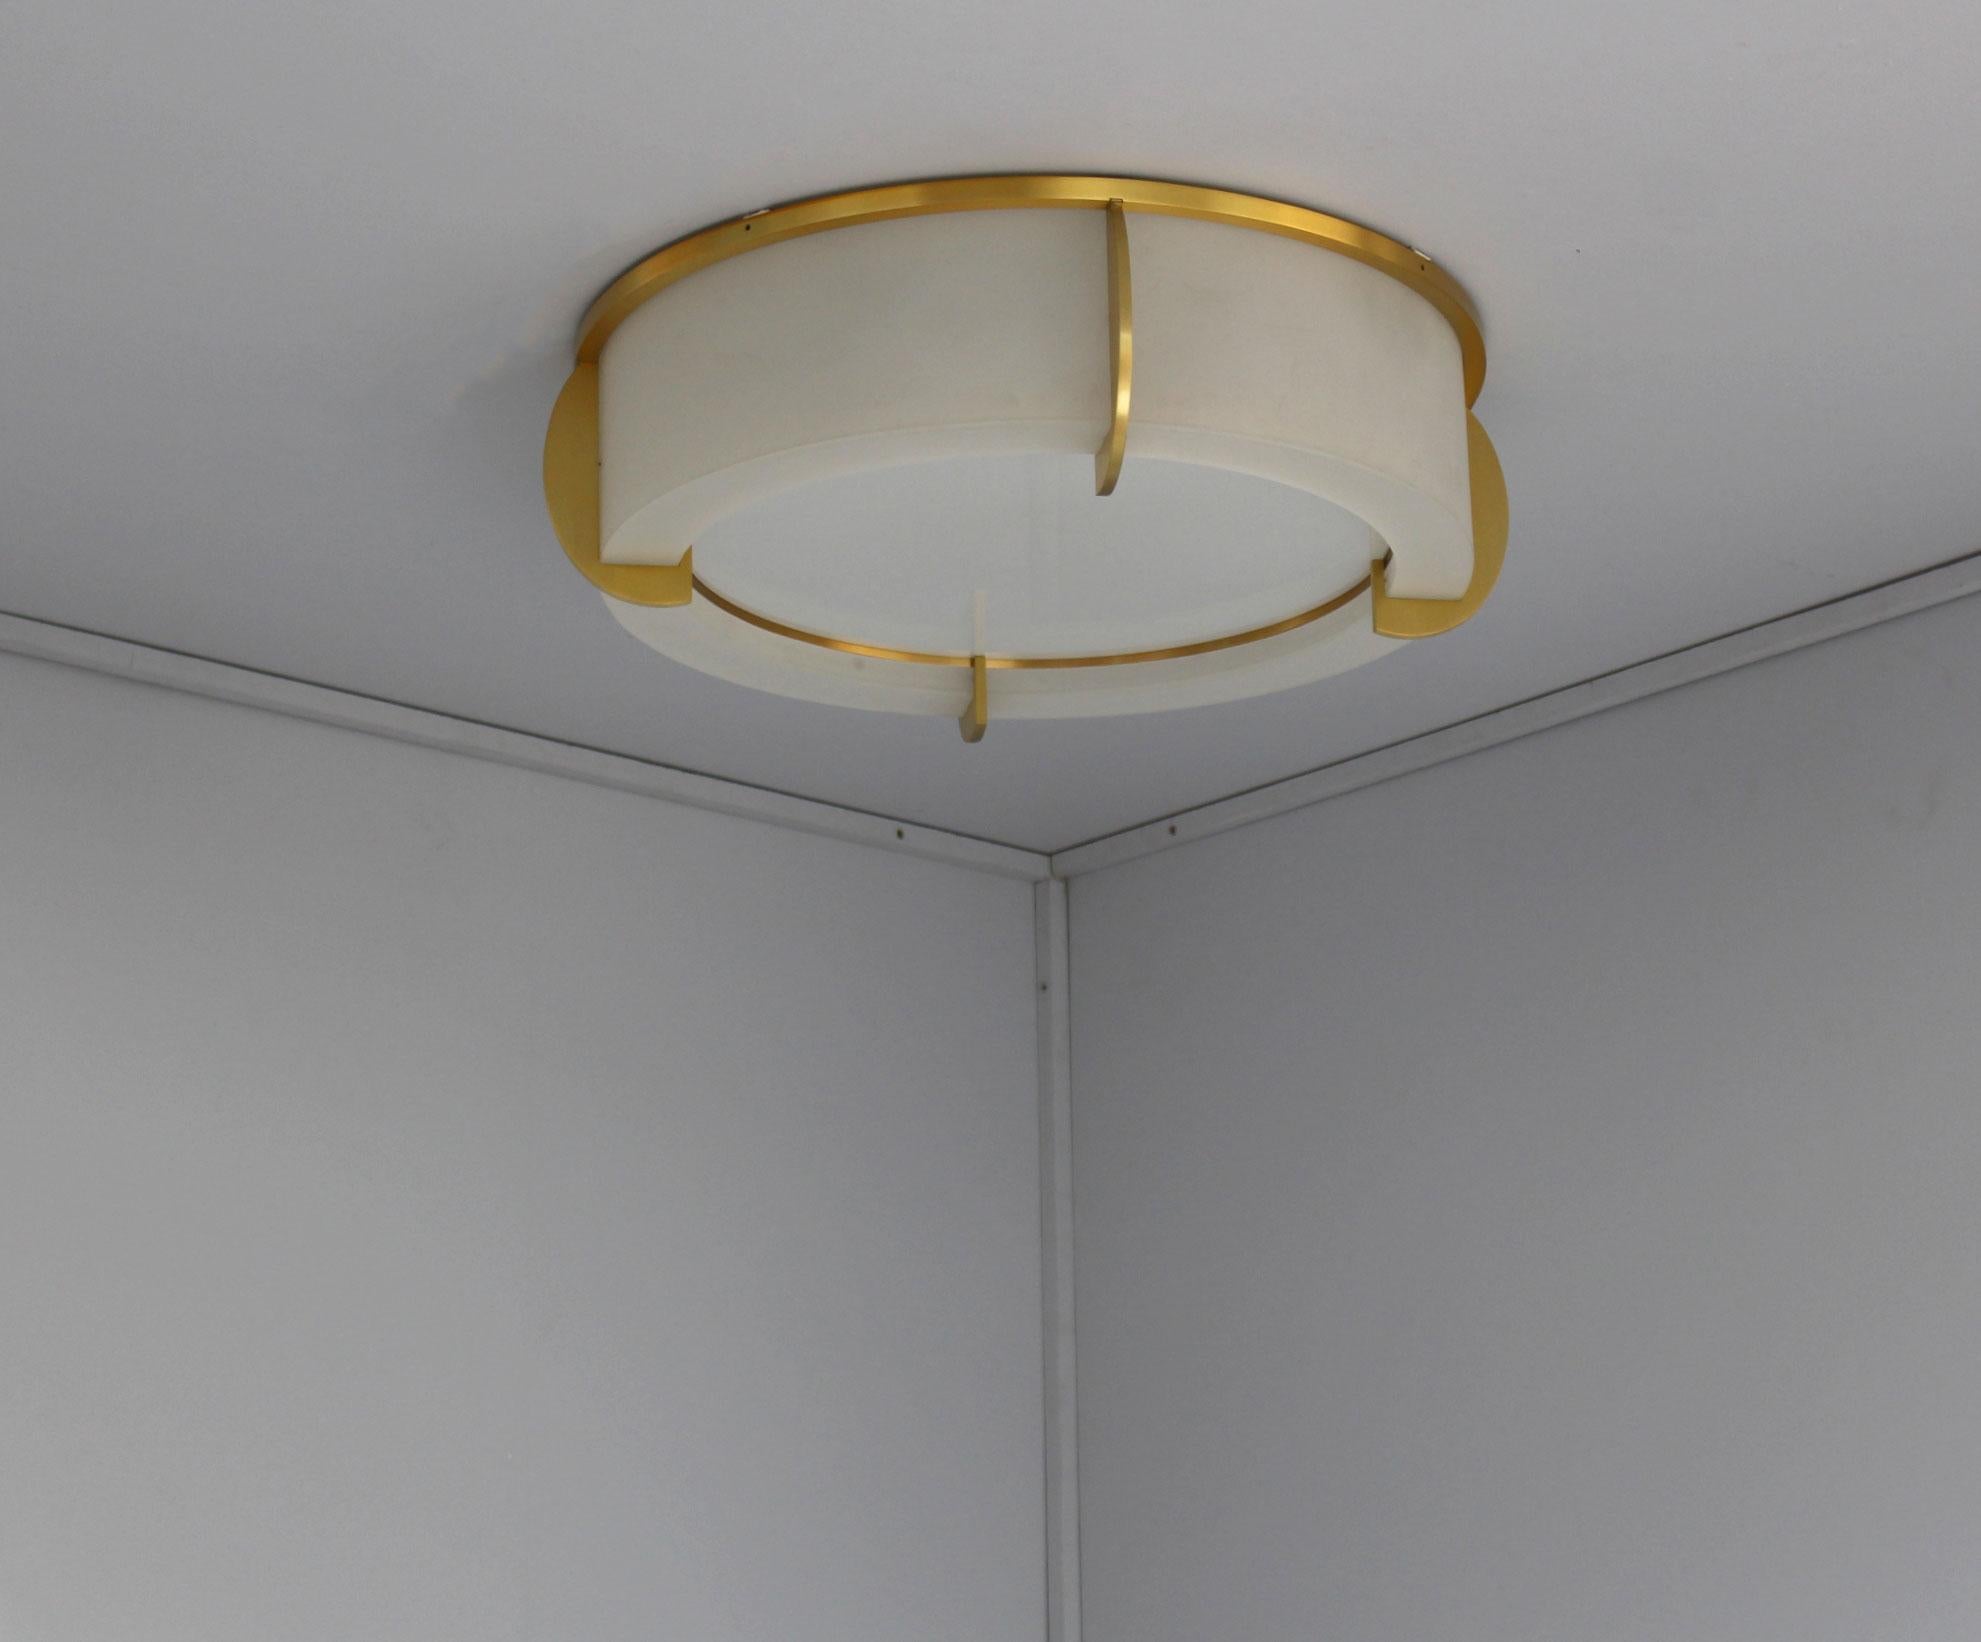 Fine French Art Deco Glass and Bronze Ceiling Light by Jean Perzel For Sale 1